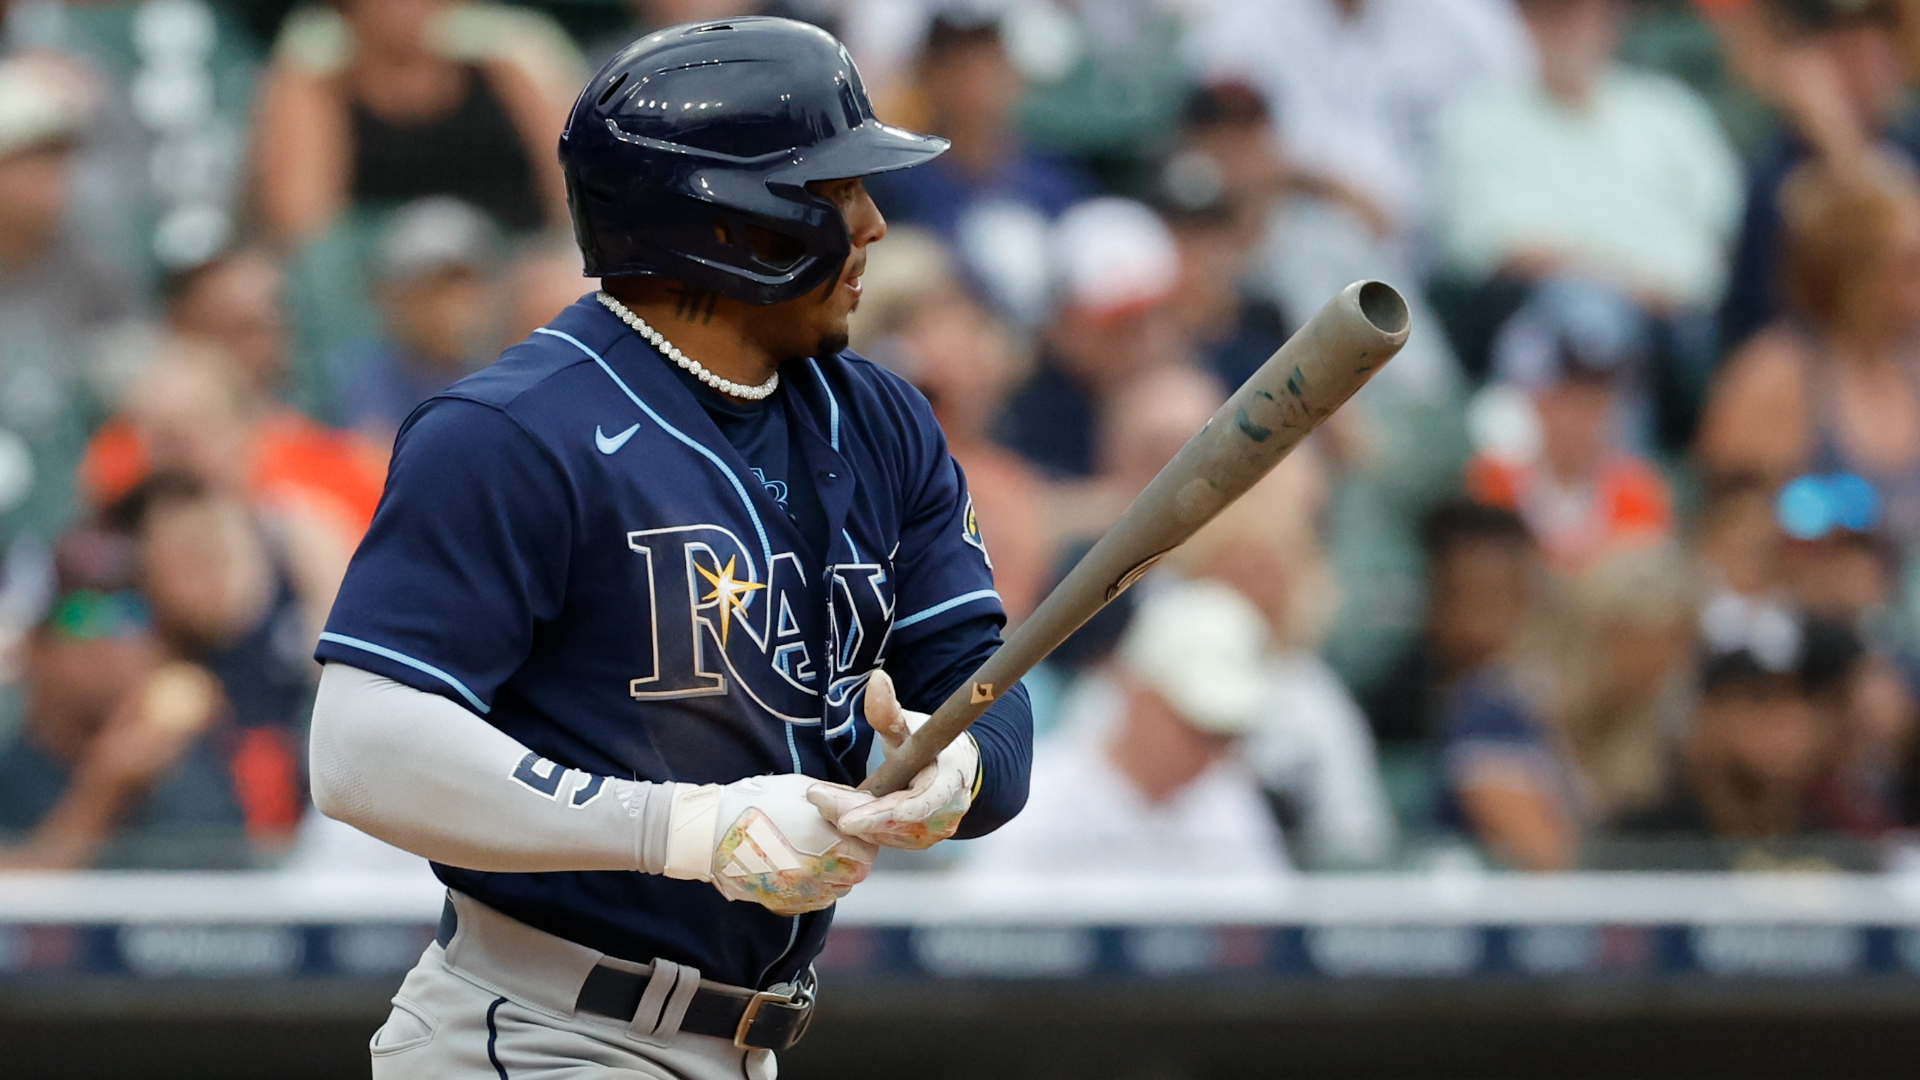 MLB Takes Next Step With Rays’ Wander Franco Amid Investigation